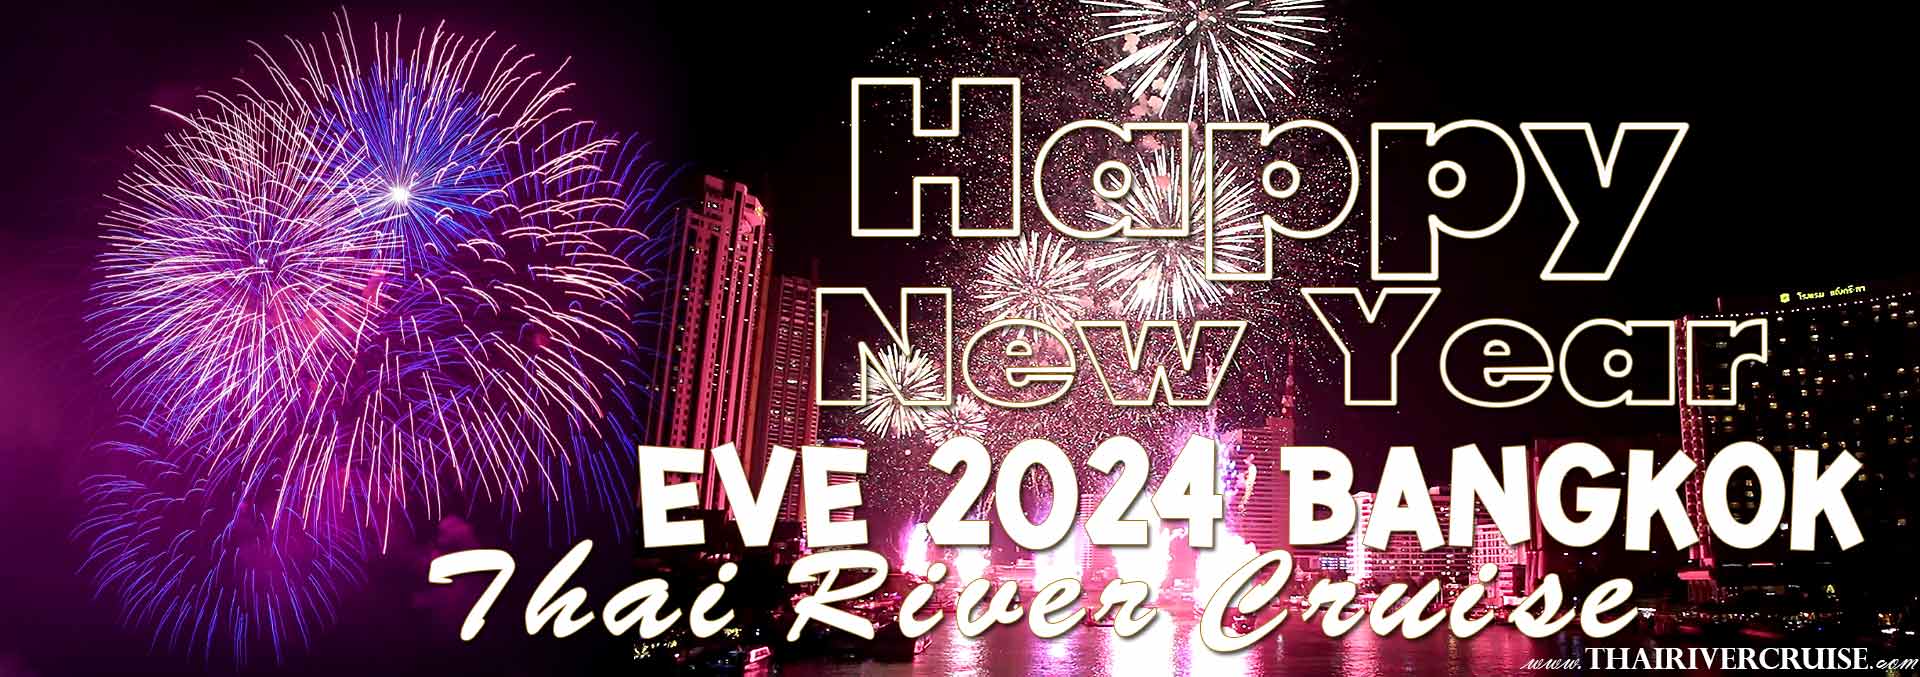 Discover The Best New Year's Eve Dinner Cruise Options In Bangkok for New Year Eve 2024 Bangkok Fireworks  New Years Eve Bangkok 2024 Dinner Countdown River Cruise on the Chao Phraya River Bangkok Thailand on  31 December 2023 What are the best new year cruises in Thailand New year's eve bangkok 2024 tickets New year's eve bangkok 2024 packages Bangkok new years 2024 Bangkok new year 2023 Bangkok new year fireworks 2024 Bangkok new years eve river cruise When is Bangkok new year New year eve dinner bangkok 2024  Rooftop New Years Eve Party Bangkok Royal Galaxy Cruise. Let celebrate New Year Dinner Cruise from Asiatique The Riverfront